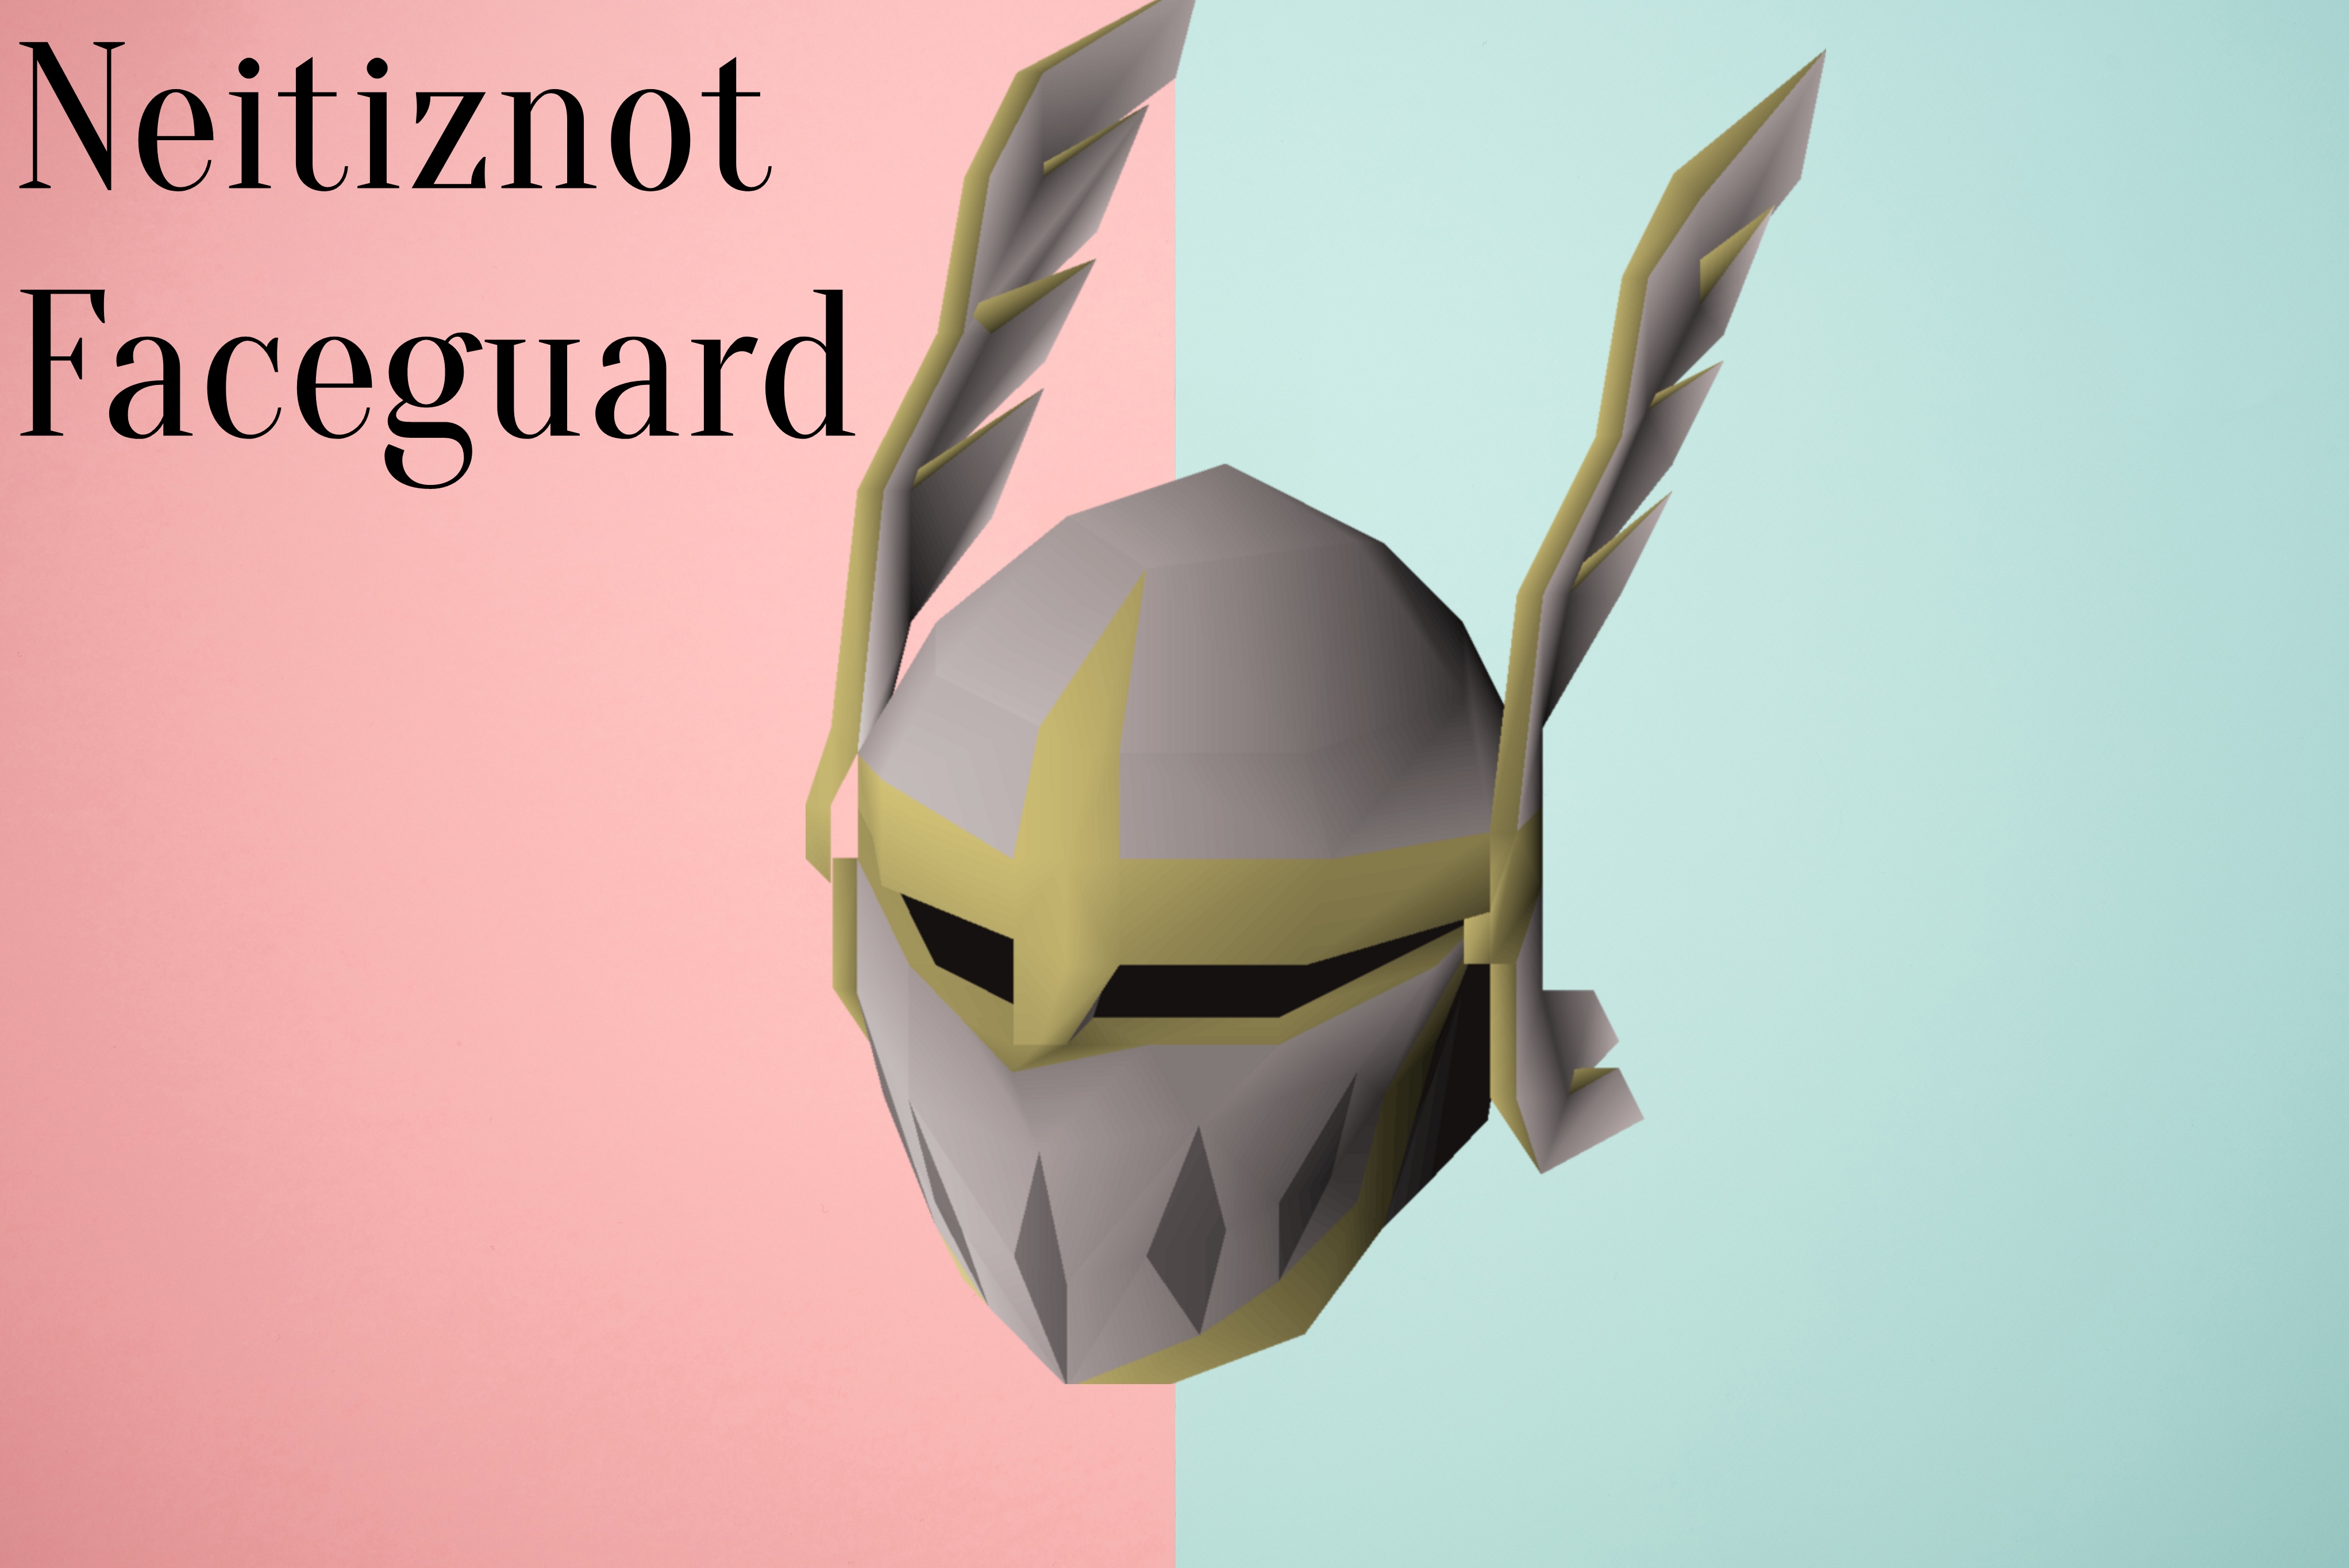 Neitiznot faceguard on a pink and blue background